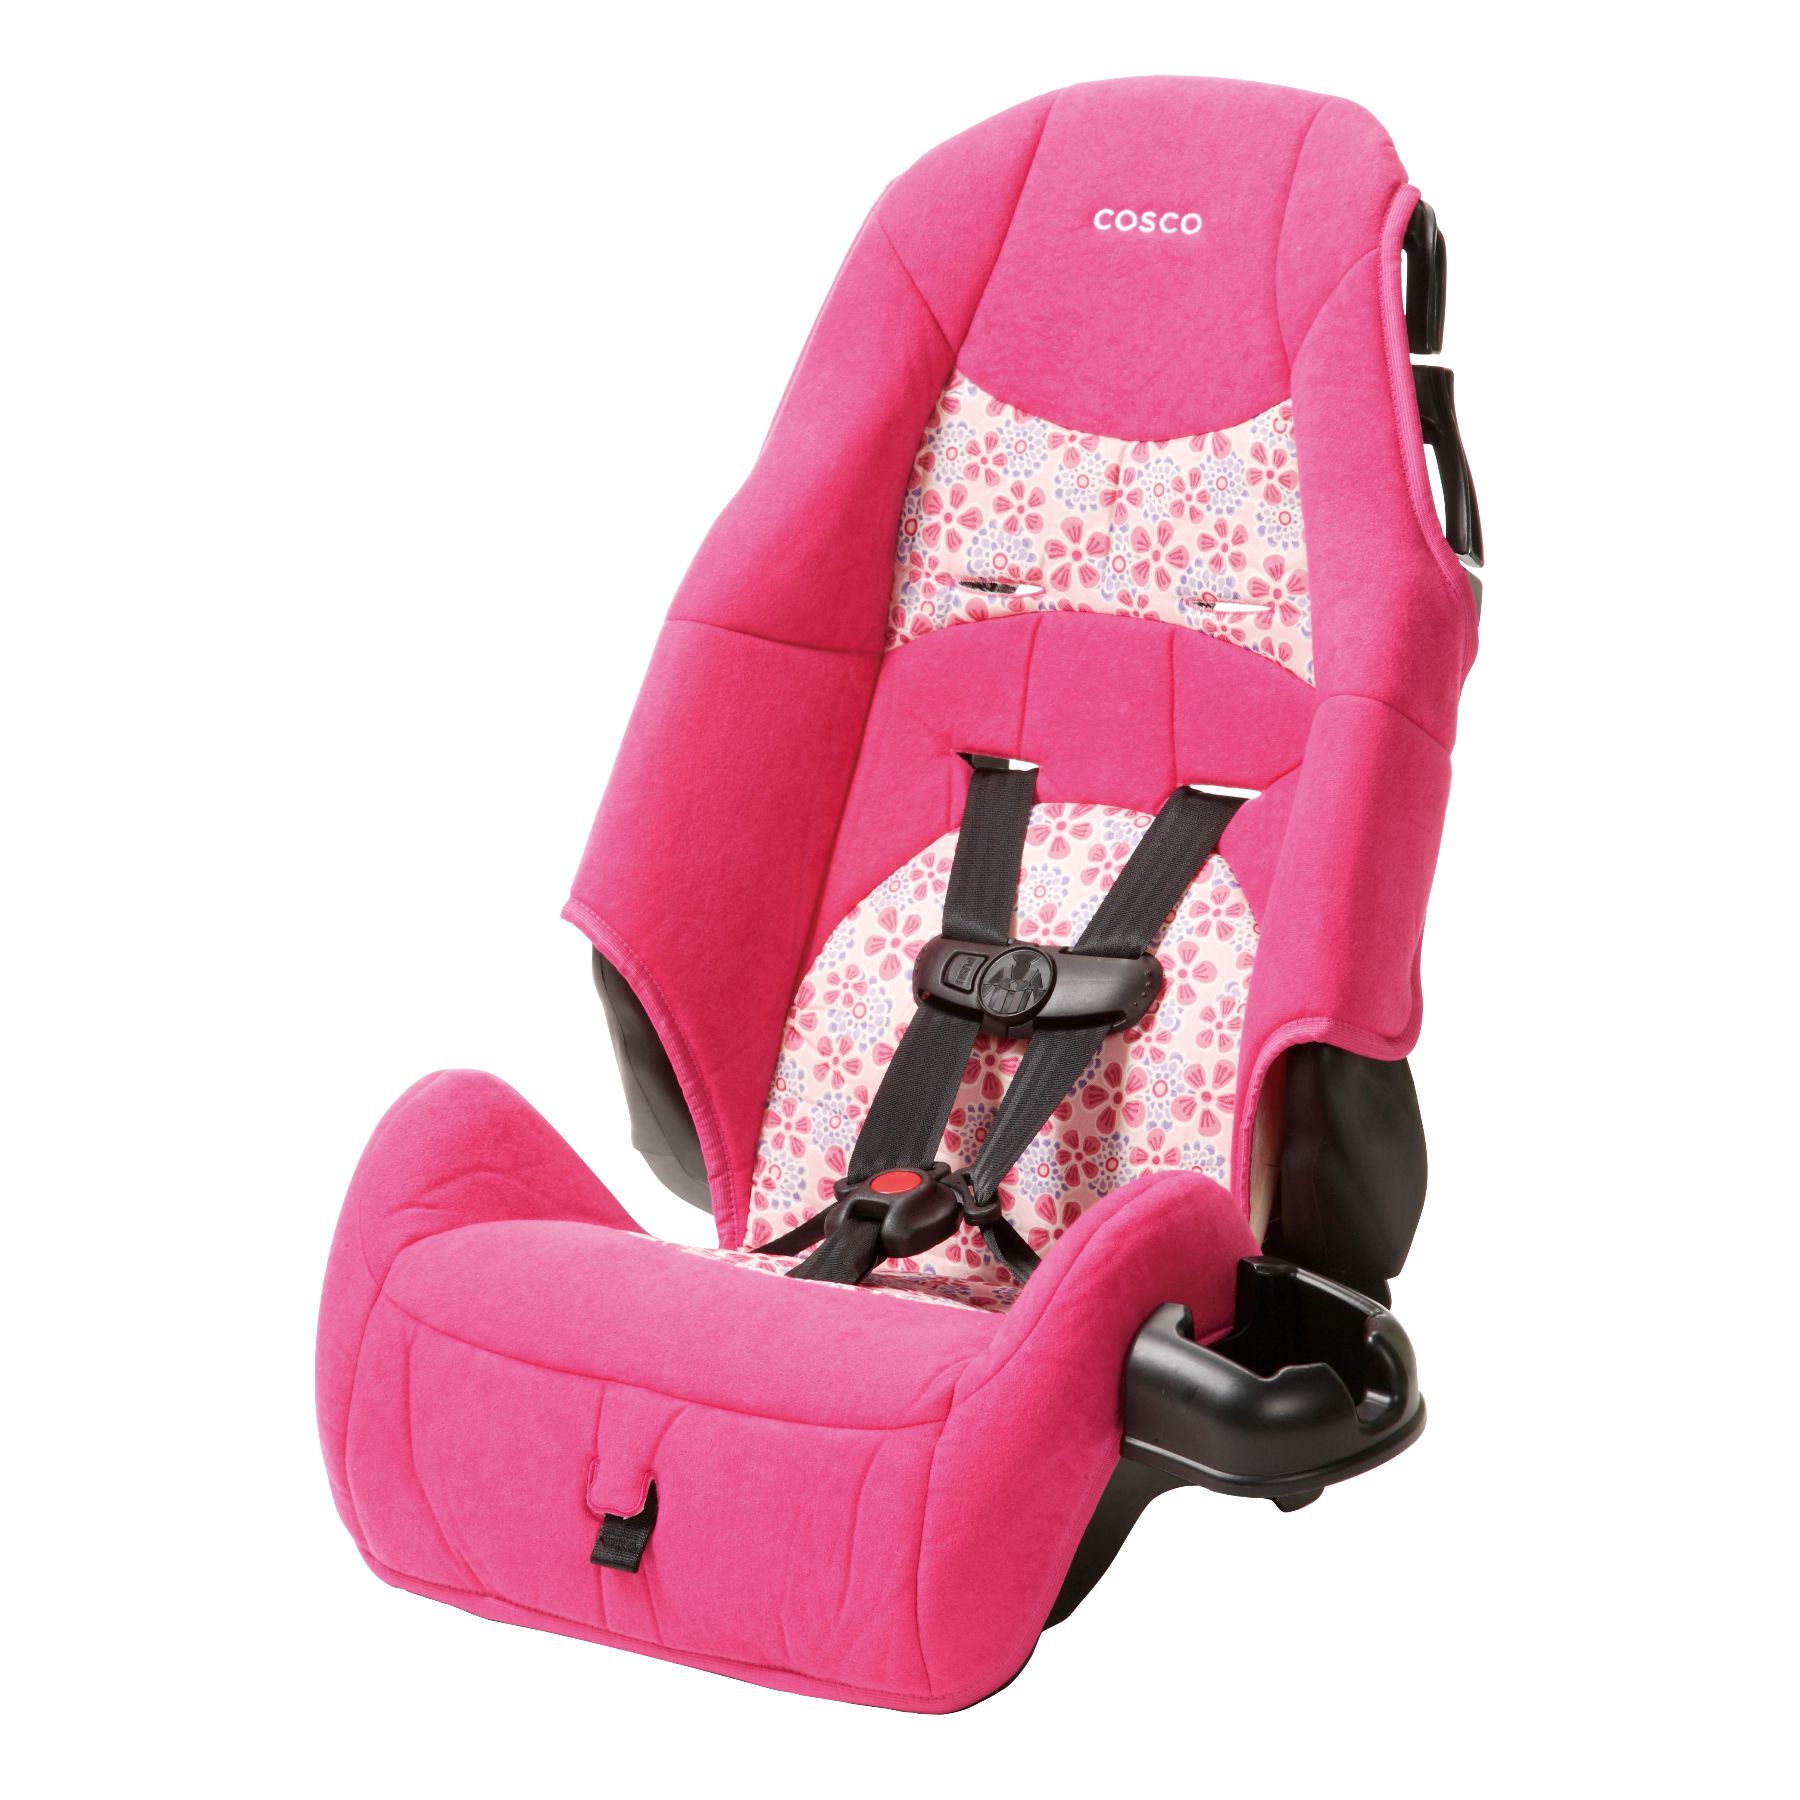 Cosco Highback Booster Car Seat - Ava